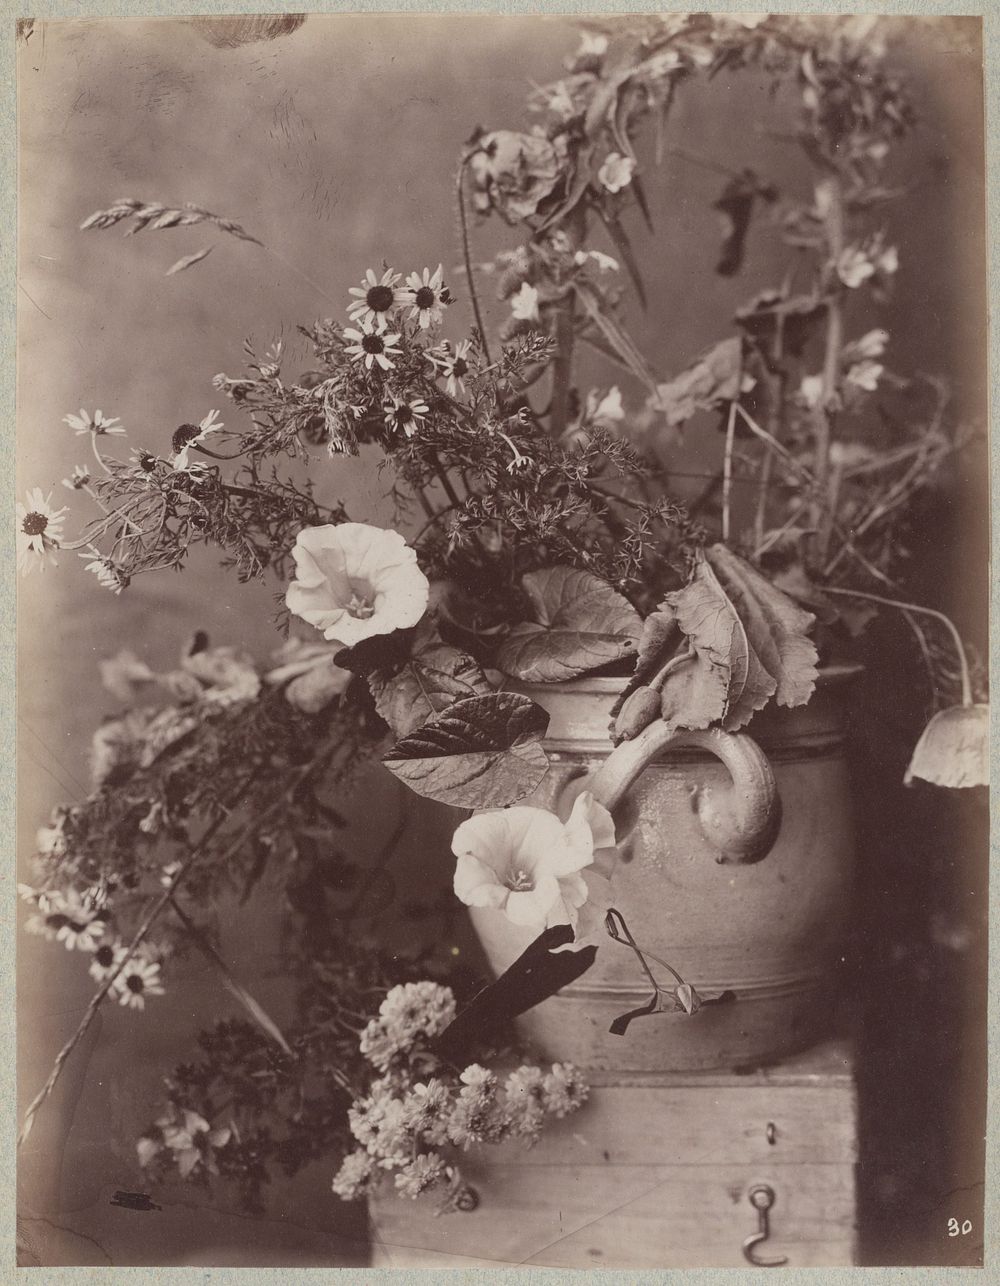 Bloemstudie met Keulse pot op kist (c. 1875 - c. 1895) by Charles Aubry, A Calavas and Bolotte and Martin